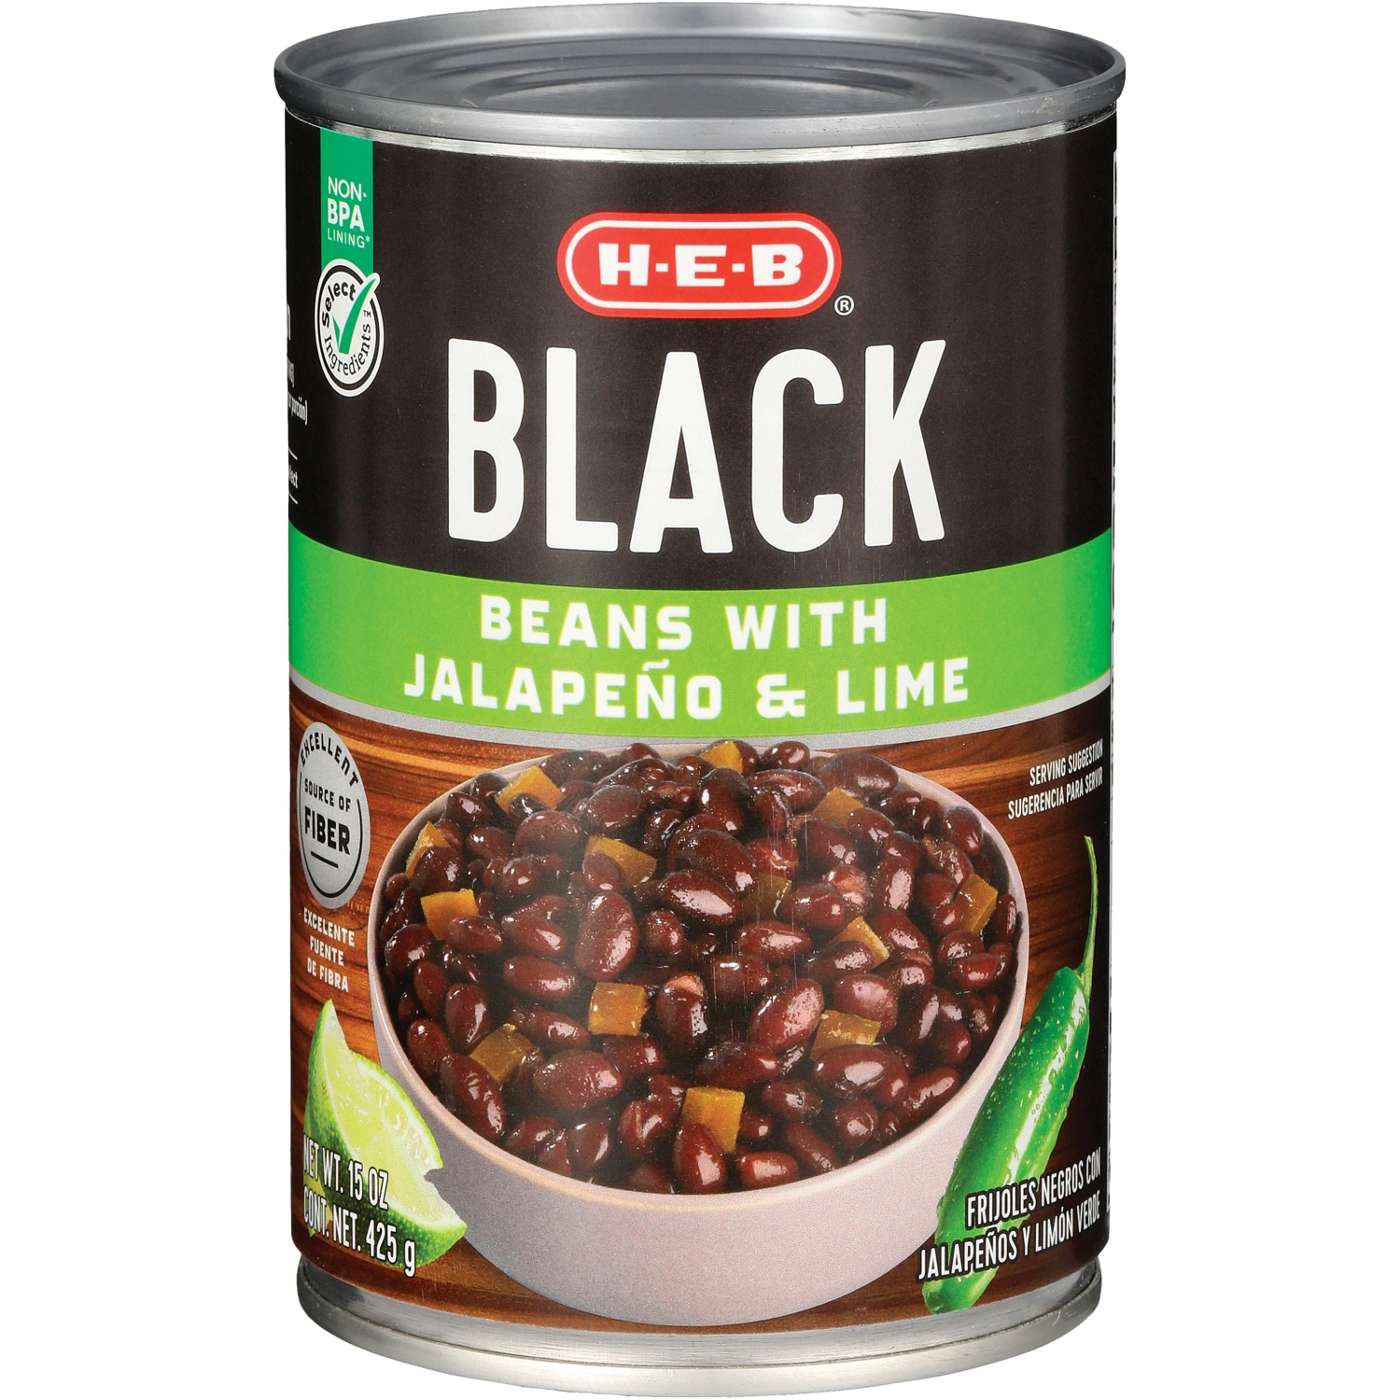 H-E-B Black Beans With Lime & Jalapenos; image 2 of 2